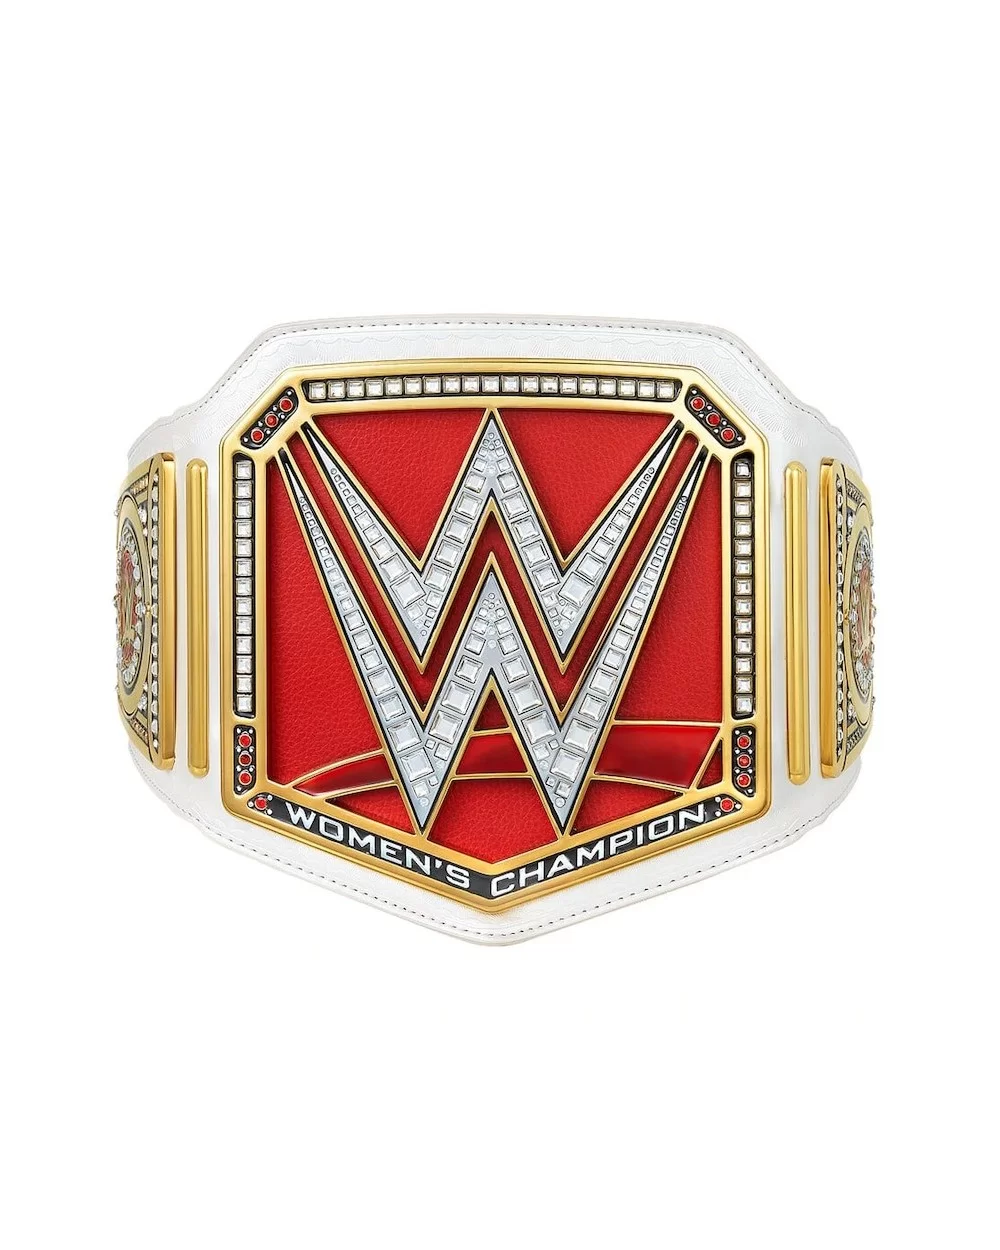 WWE RAW Women's Championship Replica Title Belt $137.60 Collectibles